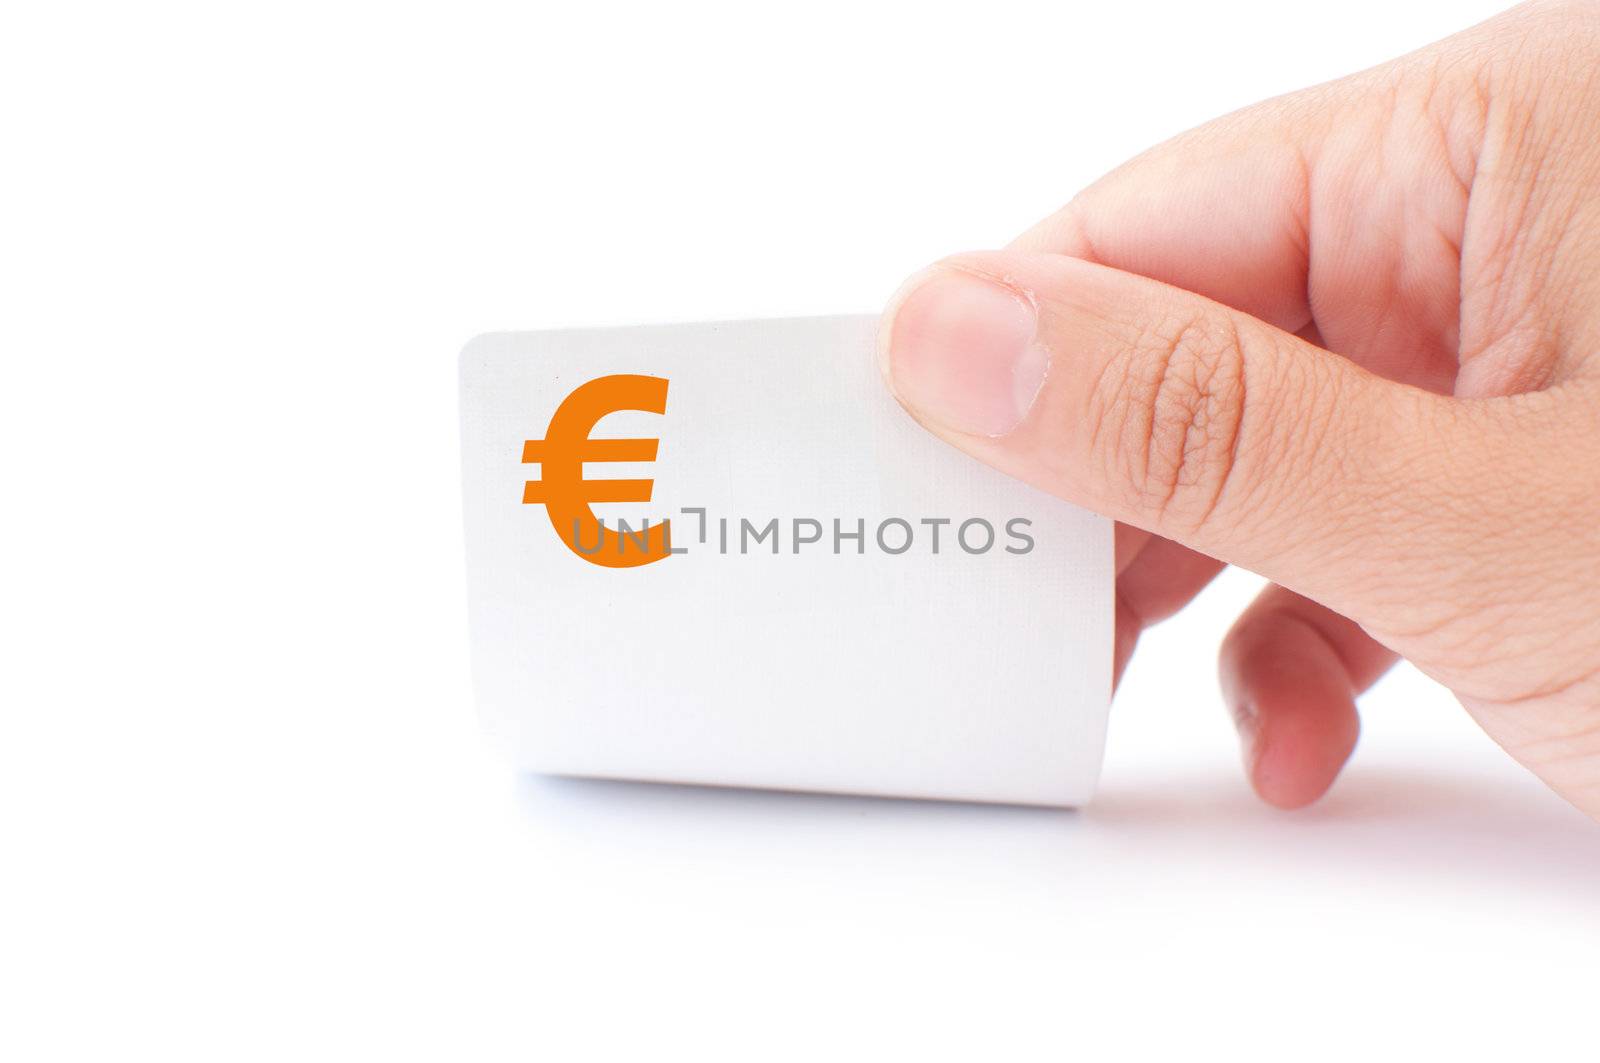 Hand holding up a playing card with a Euro currency symbol 